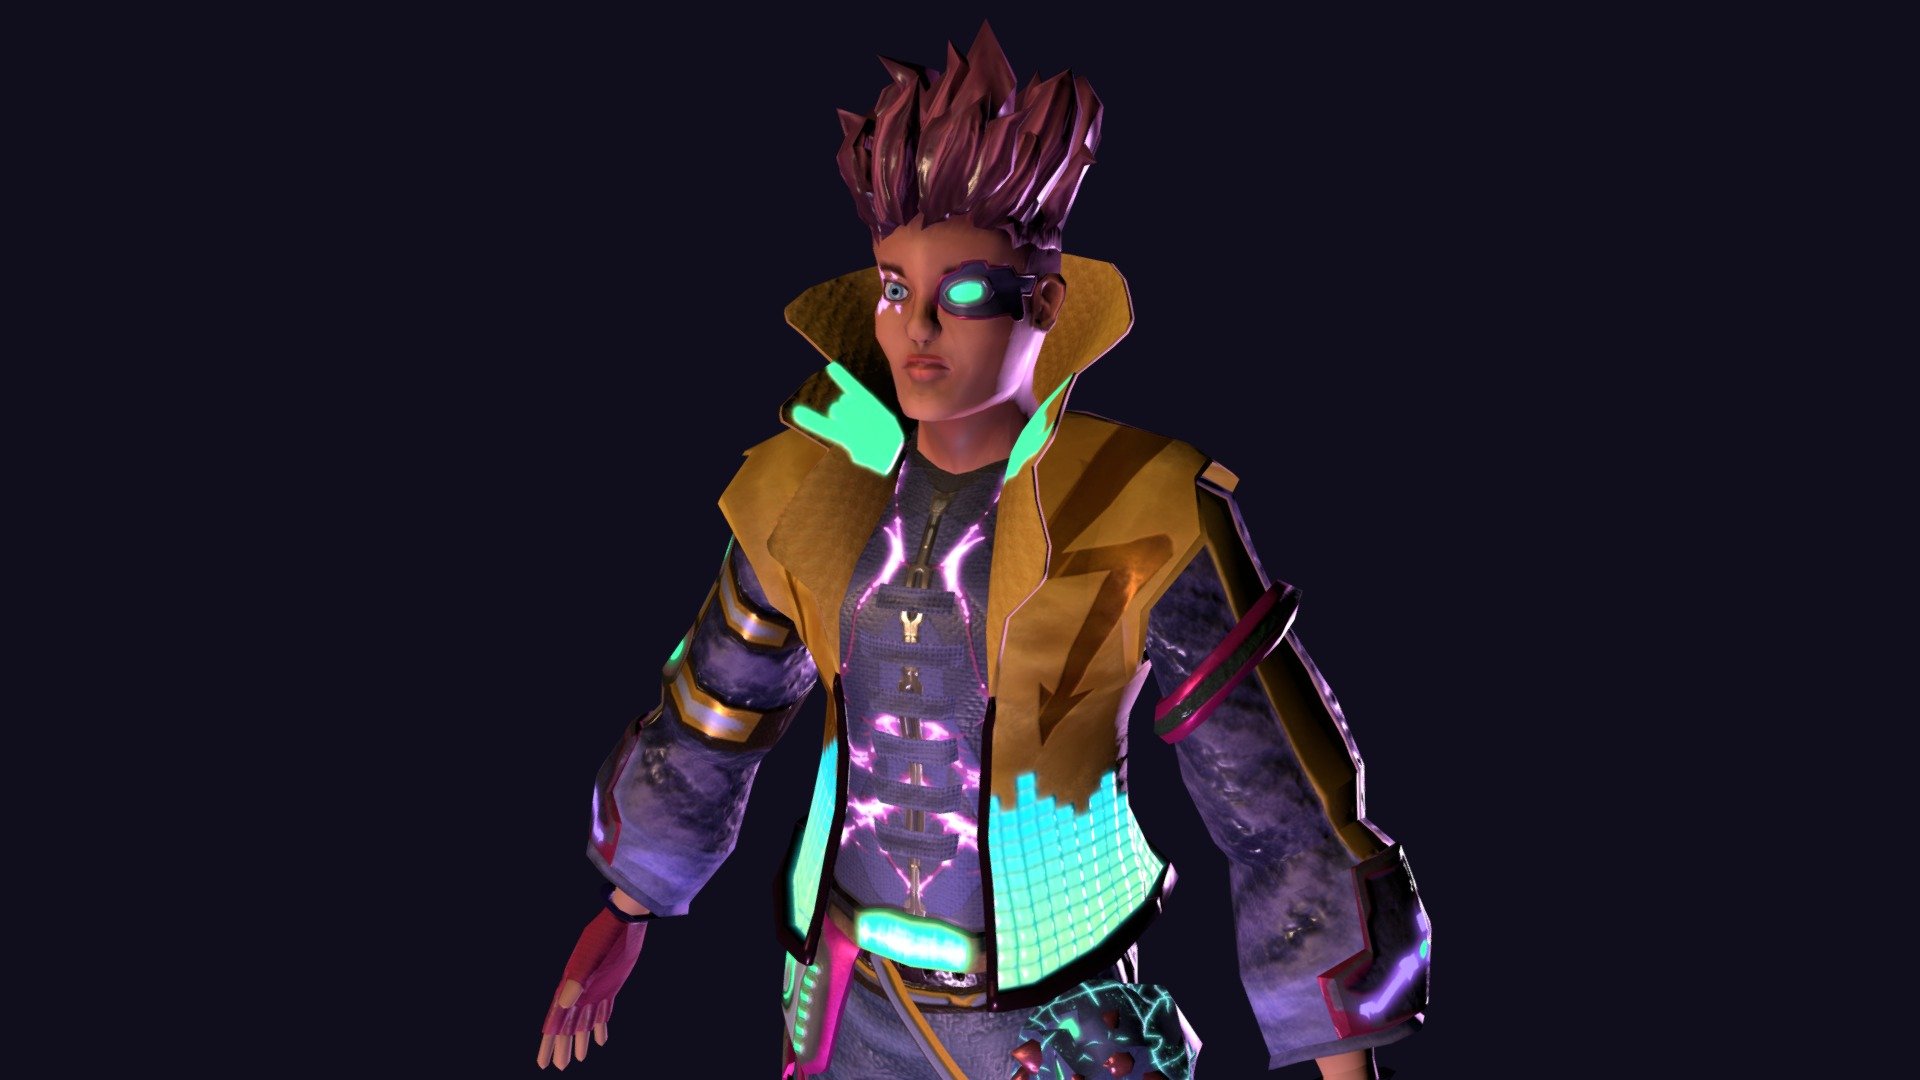 A school project that ive done recently, modelling and texturing a character. His name is ER, the protagonist who's in a rock and roll genre game who battles aliens in the distant future with music. I went crazy with the glow and vibrant colors to make him look cyberpunk and have a stylised retro look 3d model